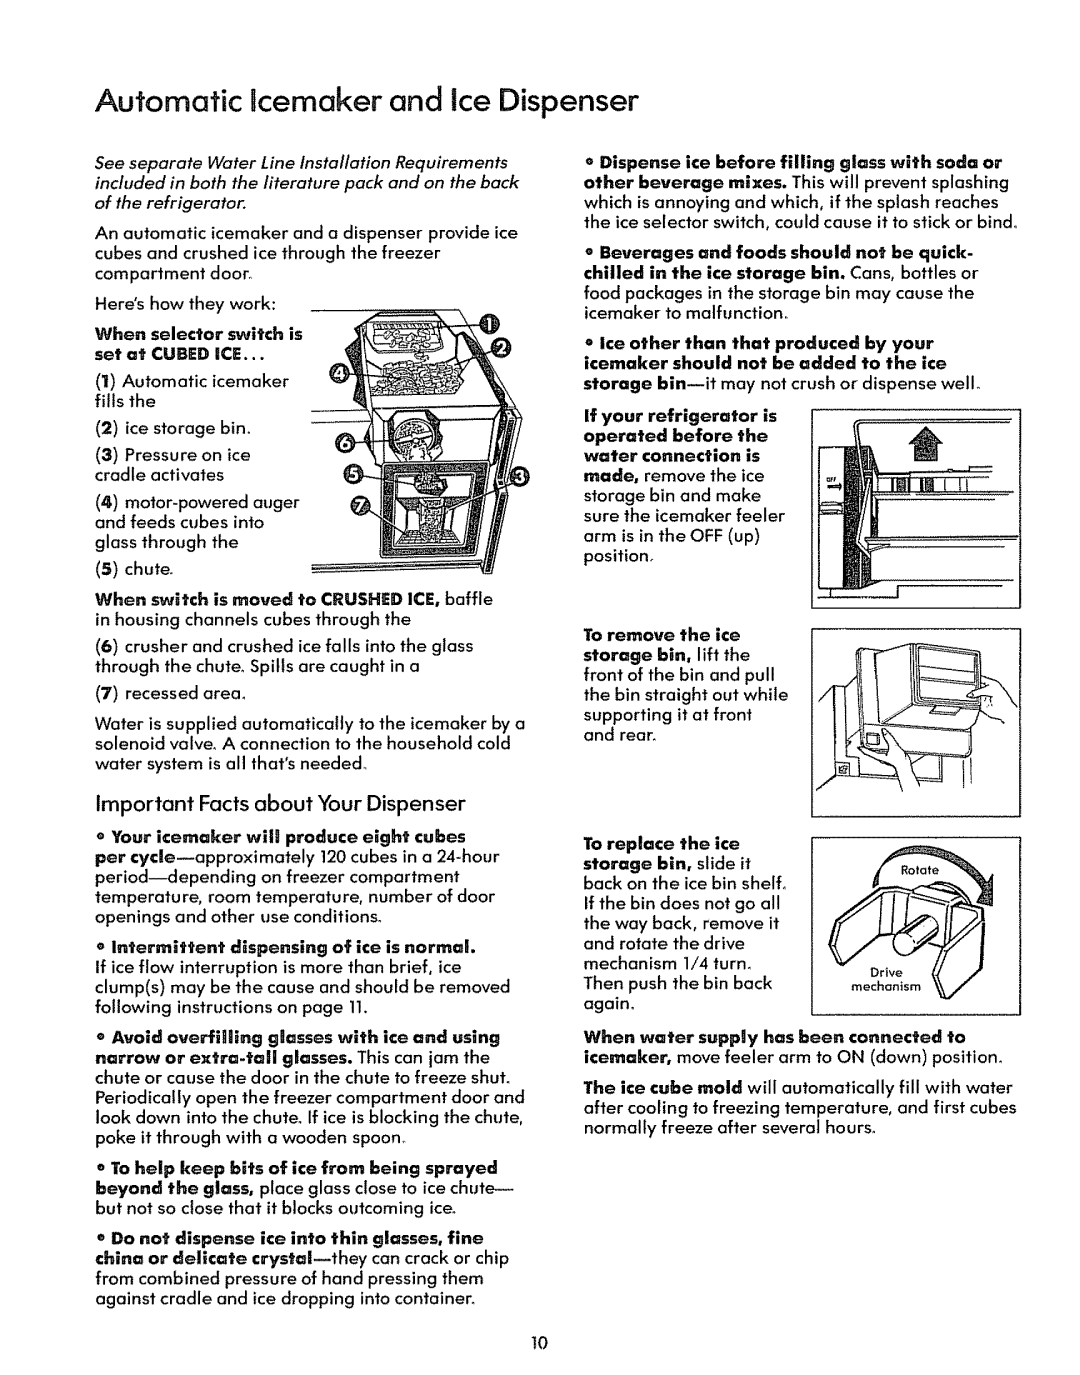 Sears 71578, 71579, 71571, 71570, 71281, 71289, 71288 Automatic cemaker and ice Dispenser, important Facts about Your Dispenser 